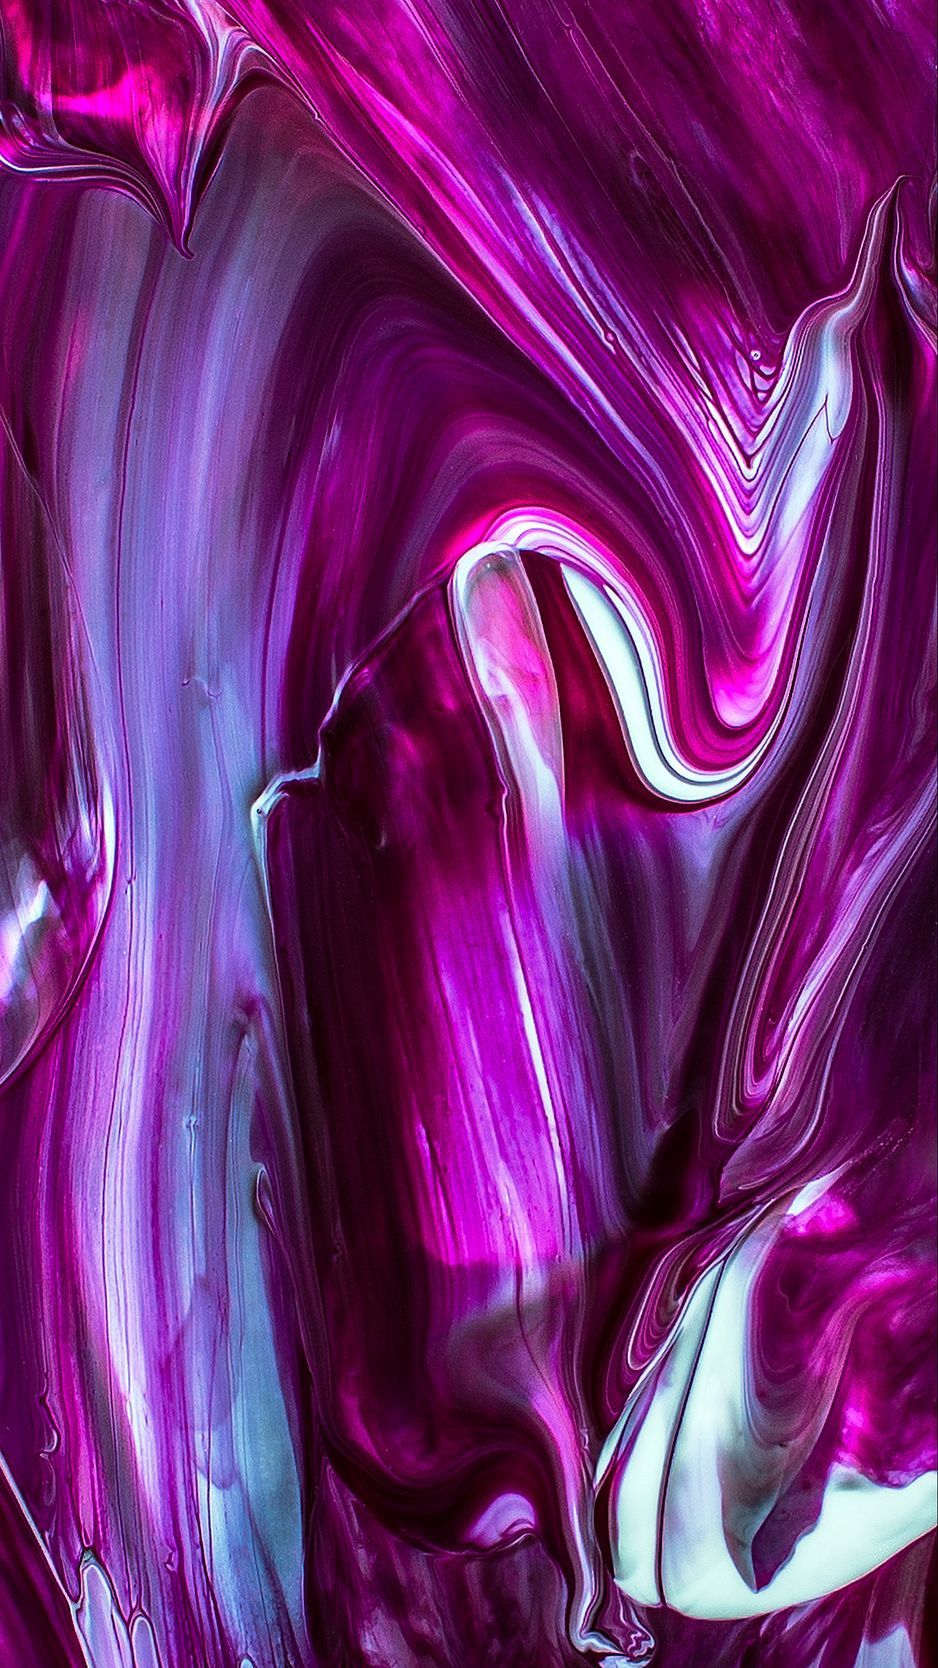 Download wallpaper 938x1668 paint, drips, lines, lilac, bright